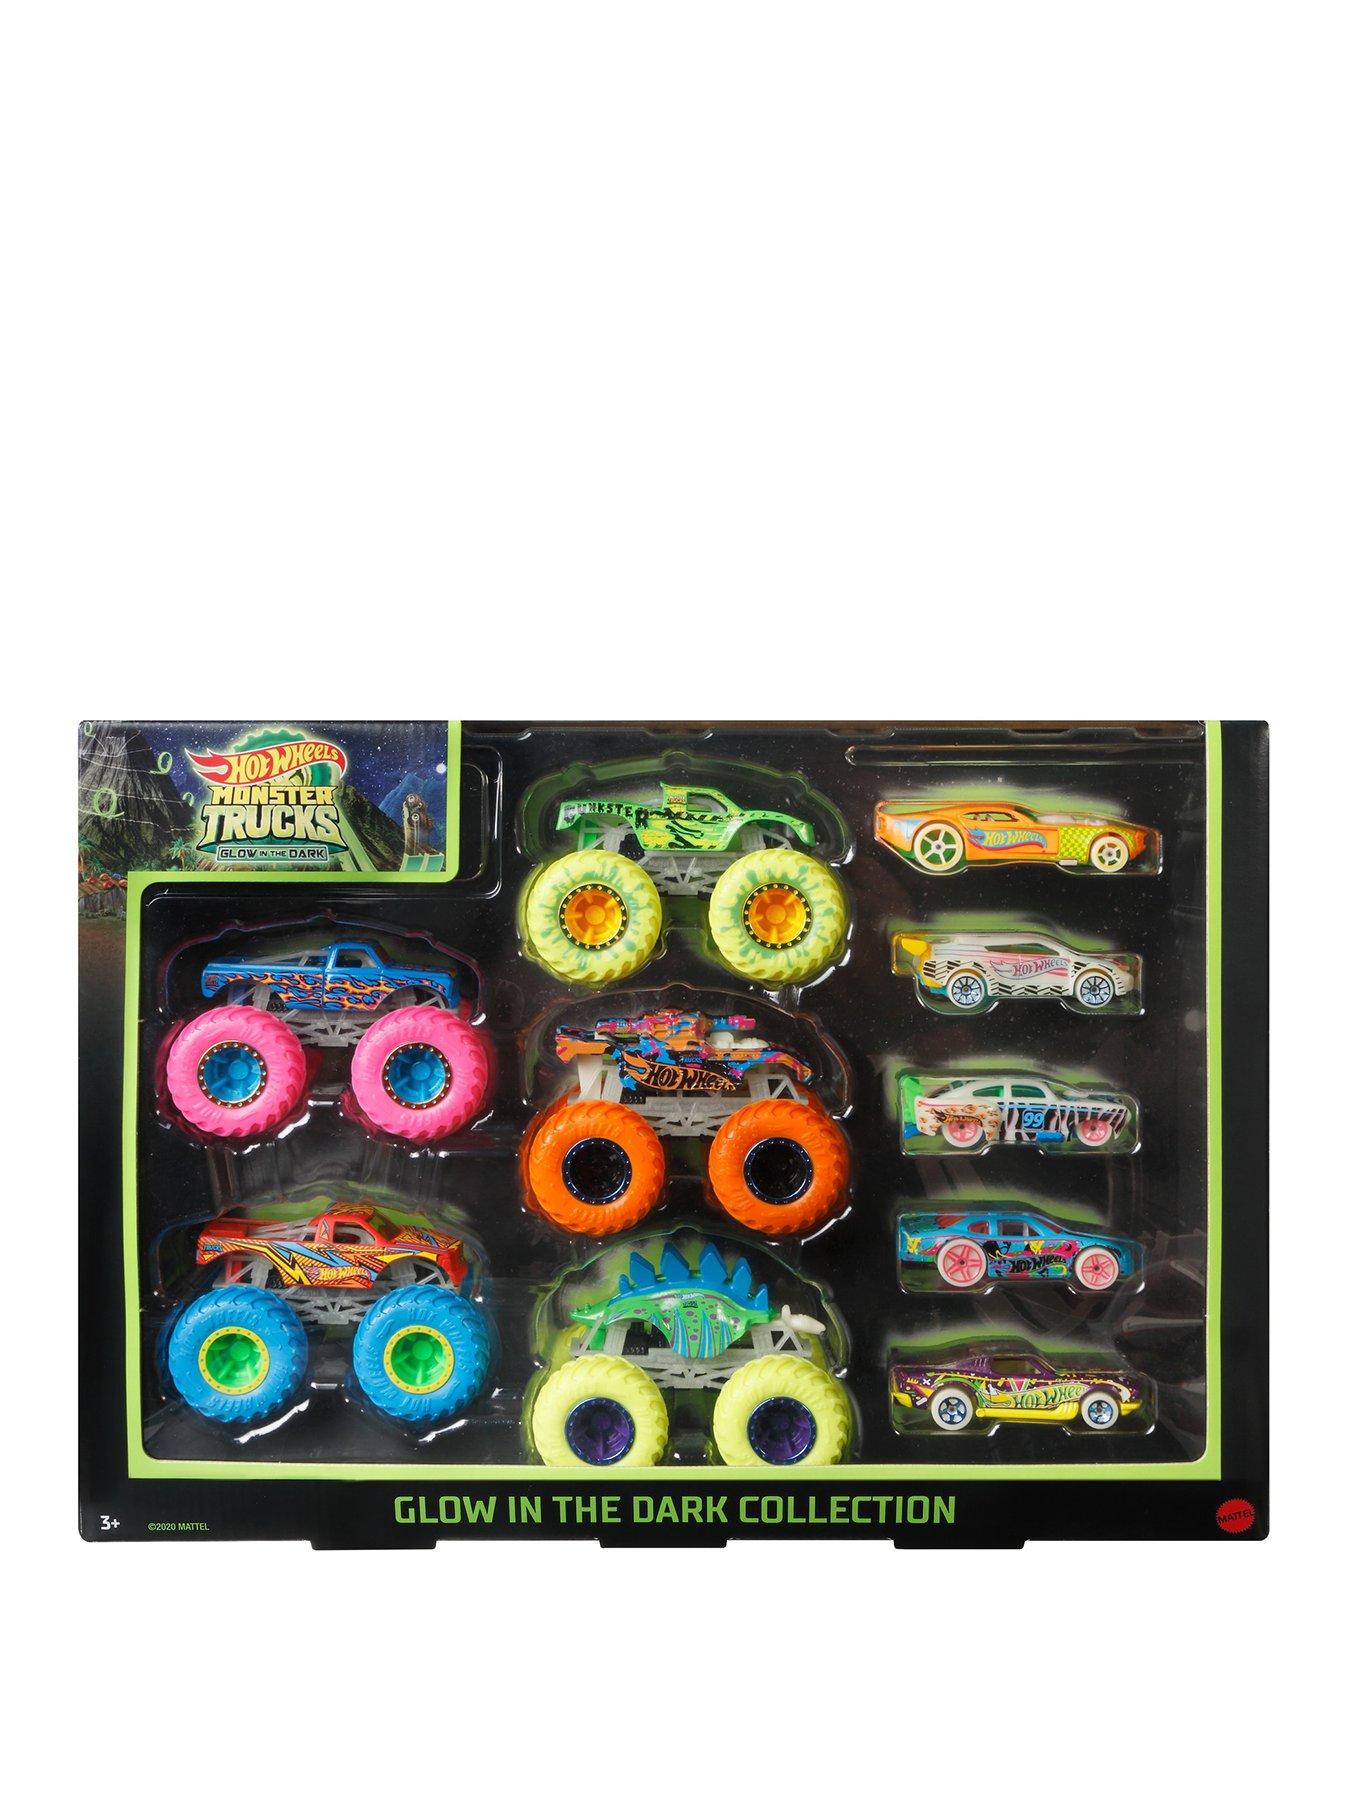 Hot Wheels Monster Trucks Live Multipack 1 To 64 Scale Toy Large Wheel  Monster Trucks Cars Set For Children Ages 36 Months And Up, 8 Pack : Target